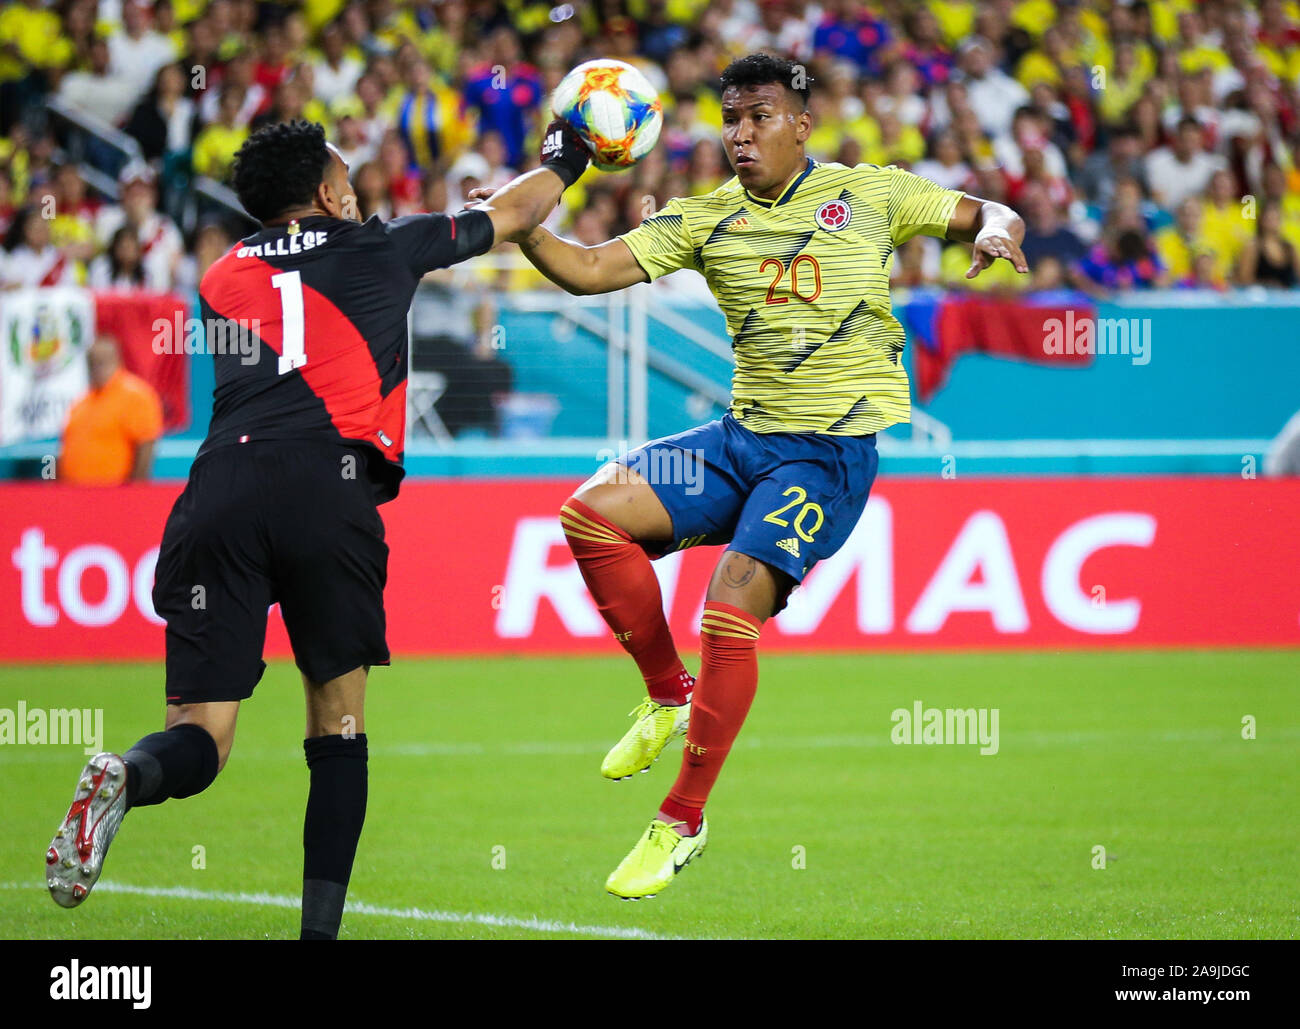 Miami Gardens, Florida, USA. 15th Nov, 2019. Peru goalkeeper Pedro Gallese (1) deflects a shot to goal pressured by Colombia forward Roger Martinez (20) during a friendly soccer match at the Hard Rock Stadium in Miami Gardens, Florida. Credit: Mario Houben/ZUMA Wire/Alamy Live News Stock Photo